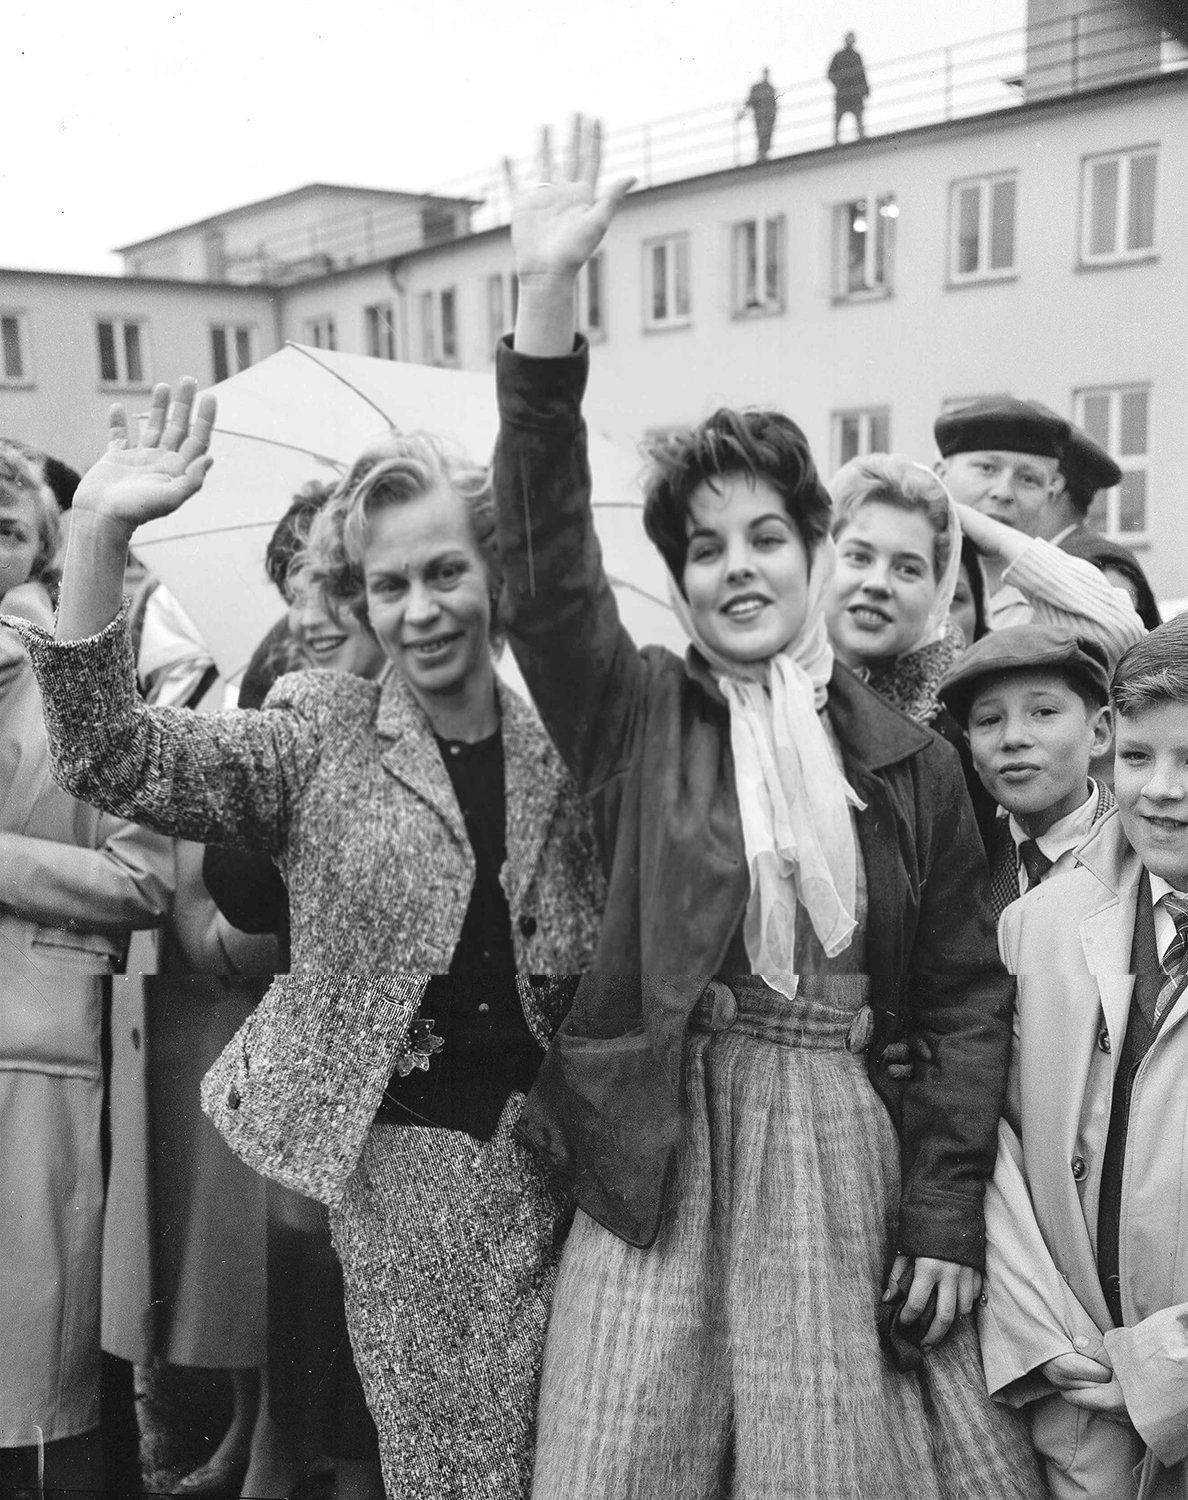  Sixteen-year-old Priscilla Beaulieu waves goodbye to Elvis Presley from behind the ropes at Rhine-Main Air Base in Frankfurt, March 2, 1960. She was not allowed to kiss the rock 'n' roll singer who departed for the U.S. and was discharged from milit